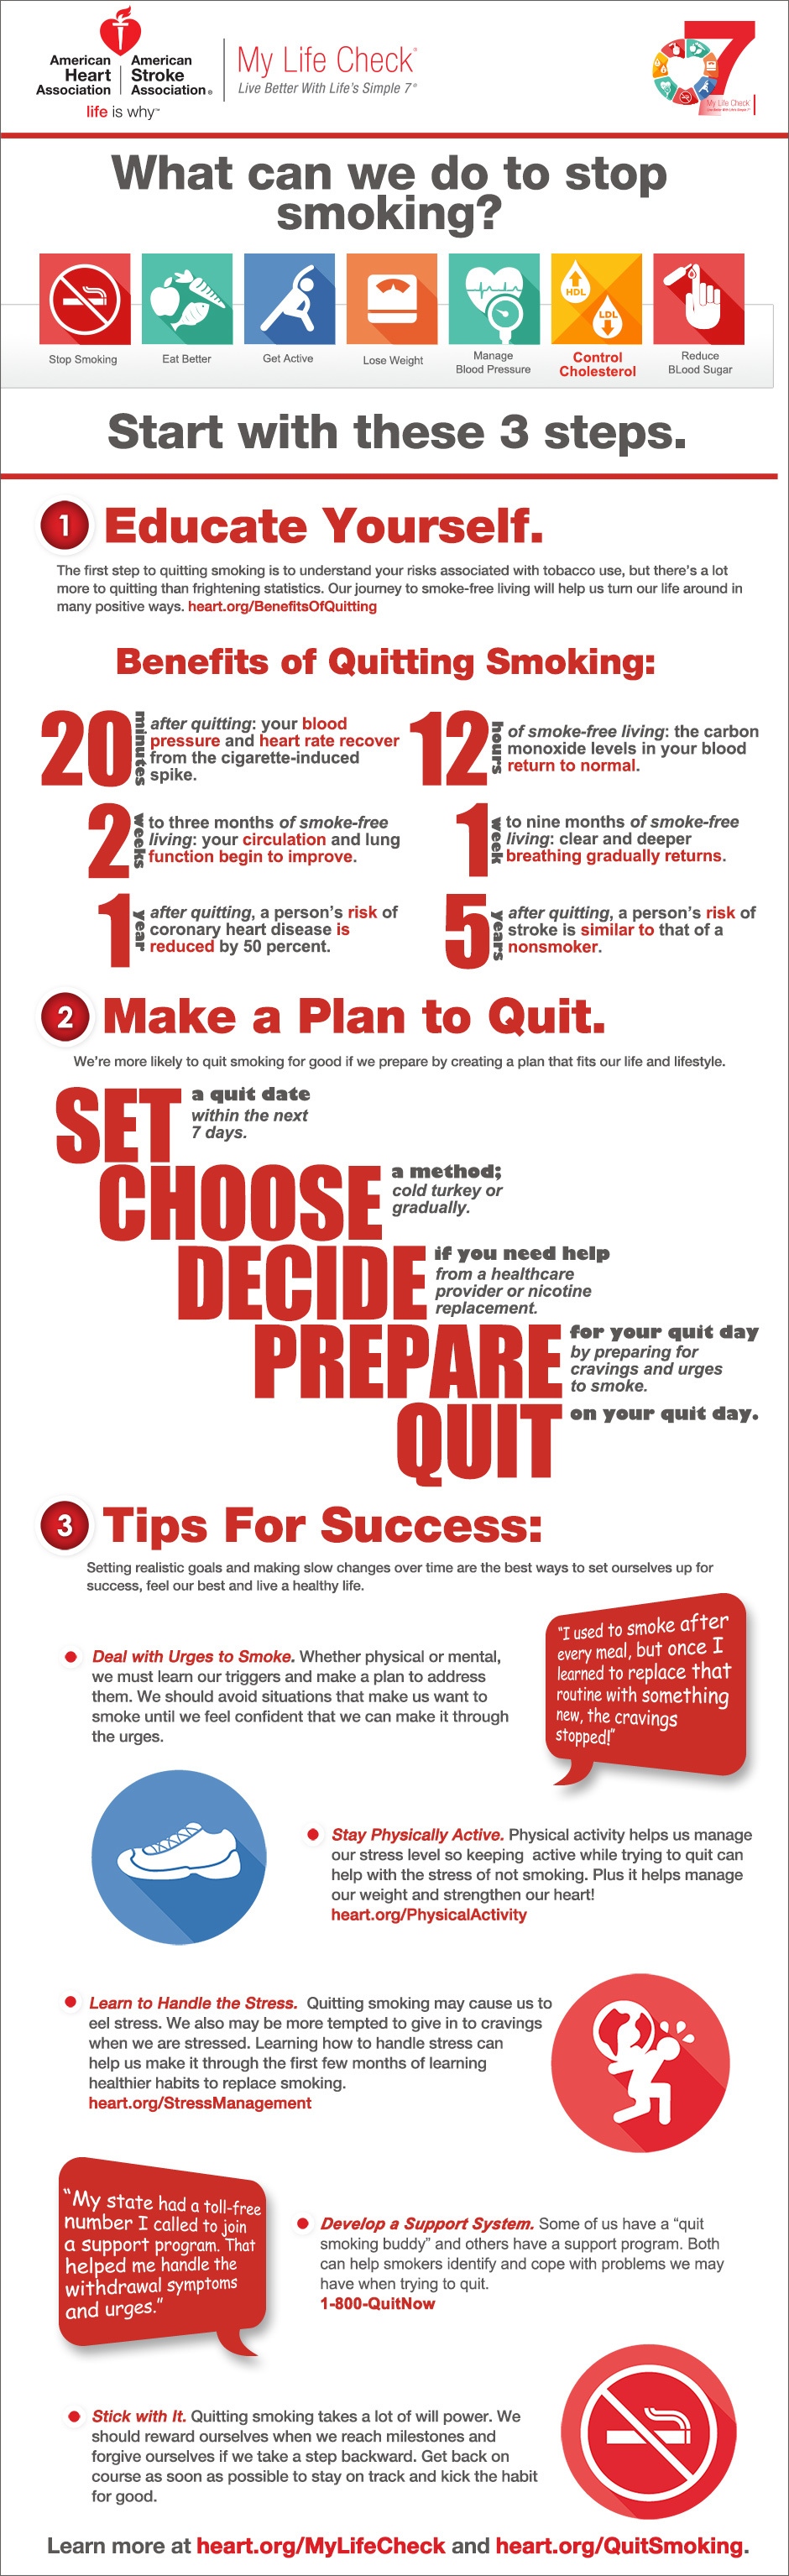 Image: These 3 steps will help you quit smoking!